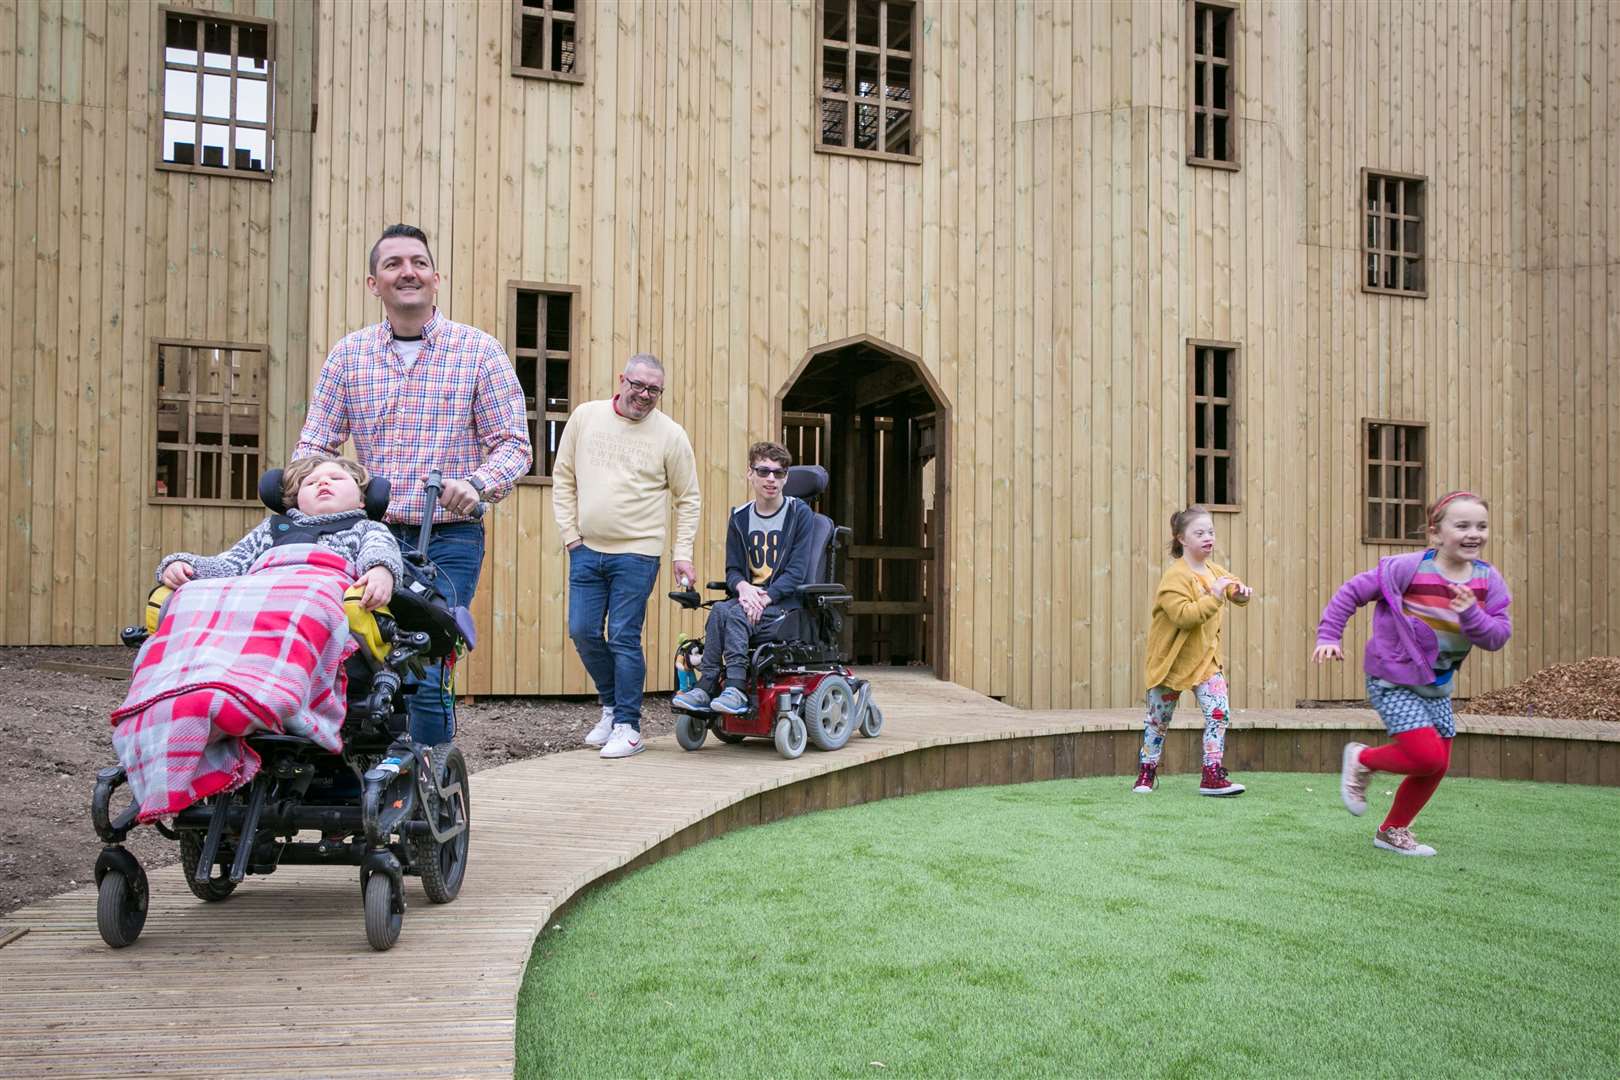 The new play area is fully accessible for all. Picture: www.matthewwalkerphotography.com (8453198)